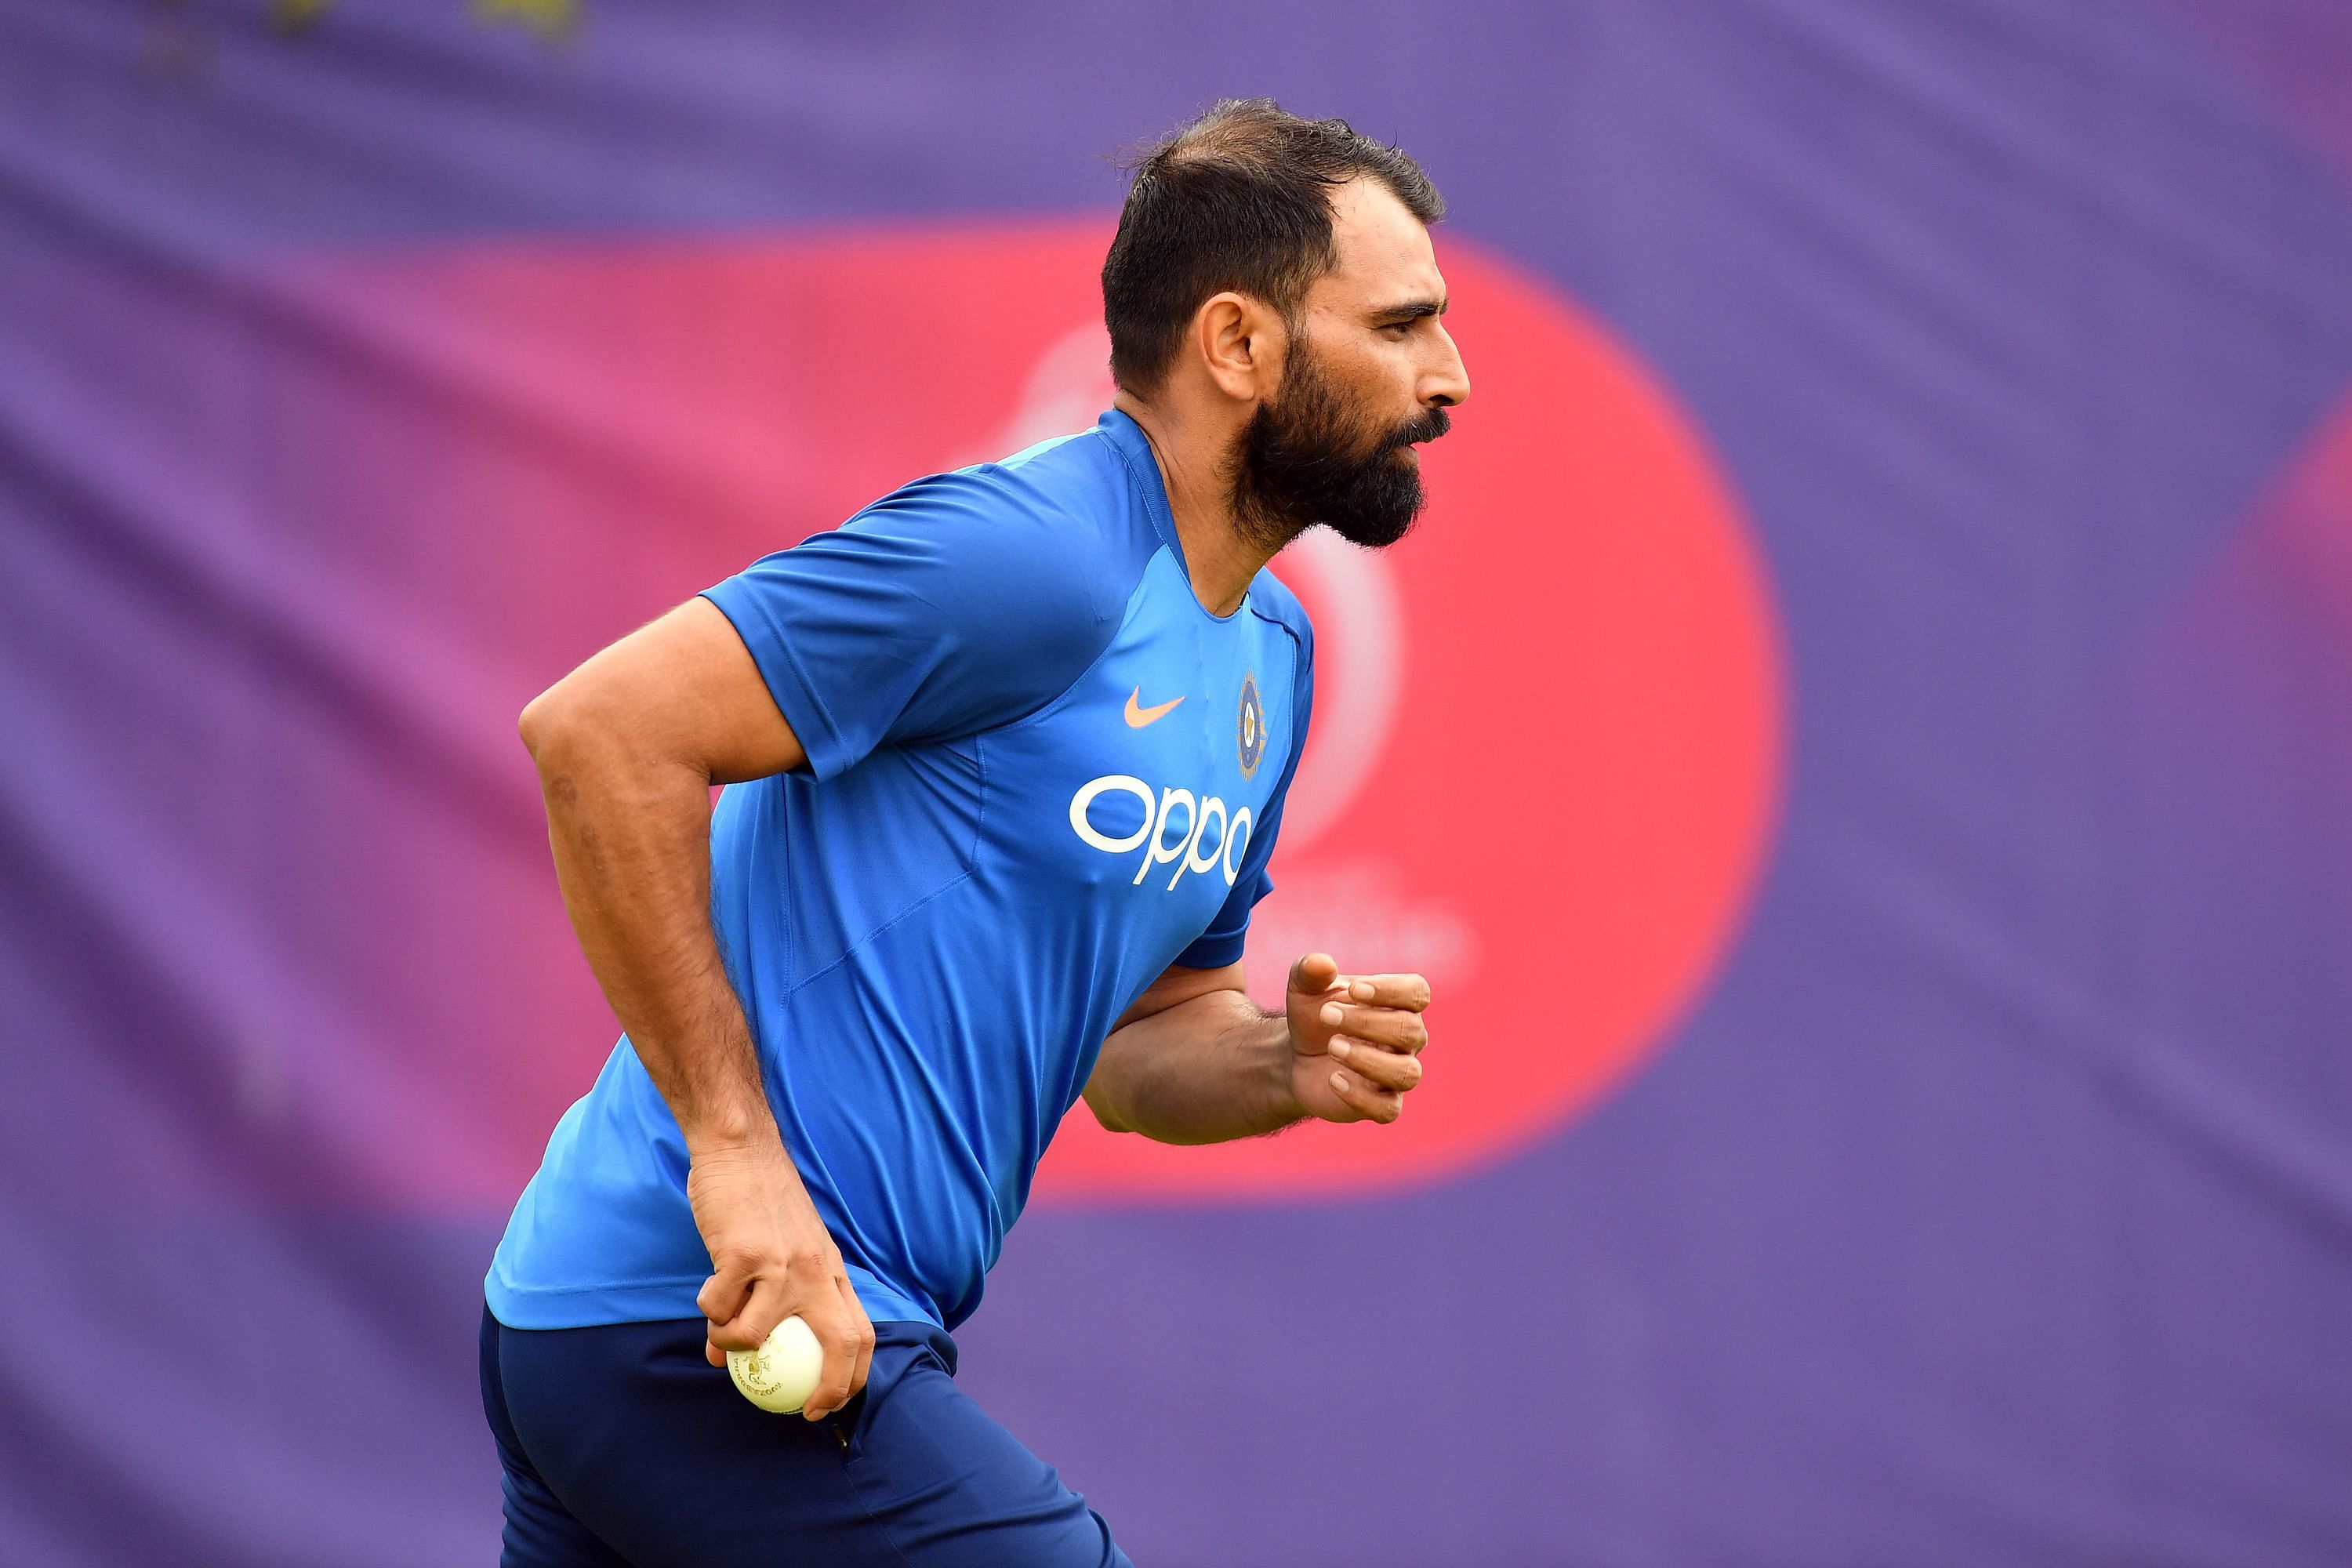 Shami said his family stood like a rock with him and that support helped him get back on his feet. (Credit: AFP Photo)